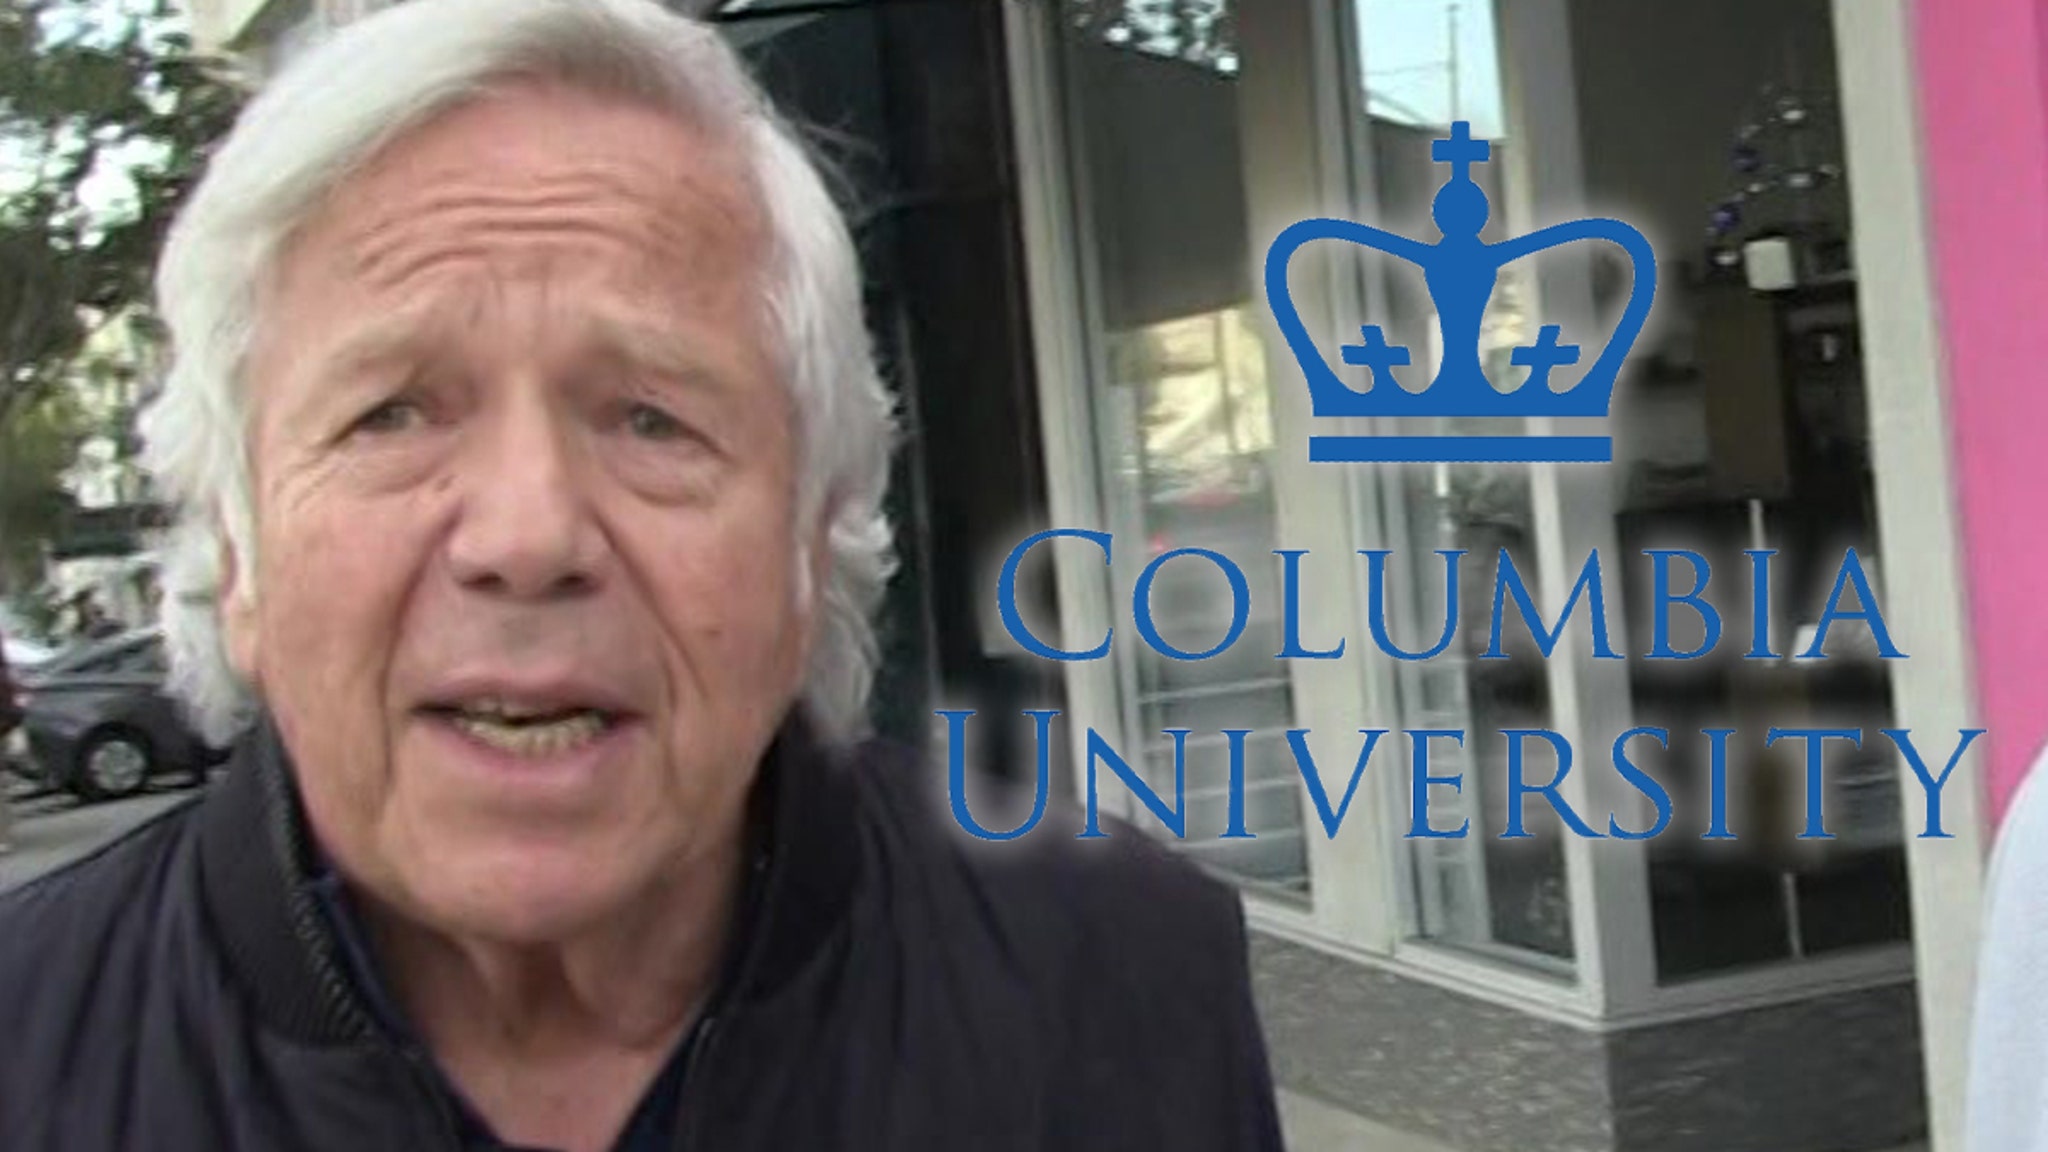 Robert Kraft “deeply saddened” by the situation at Columbia, an unrecognizable university